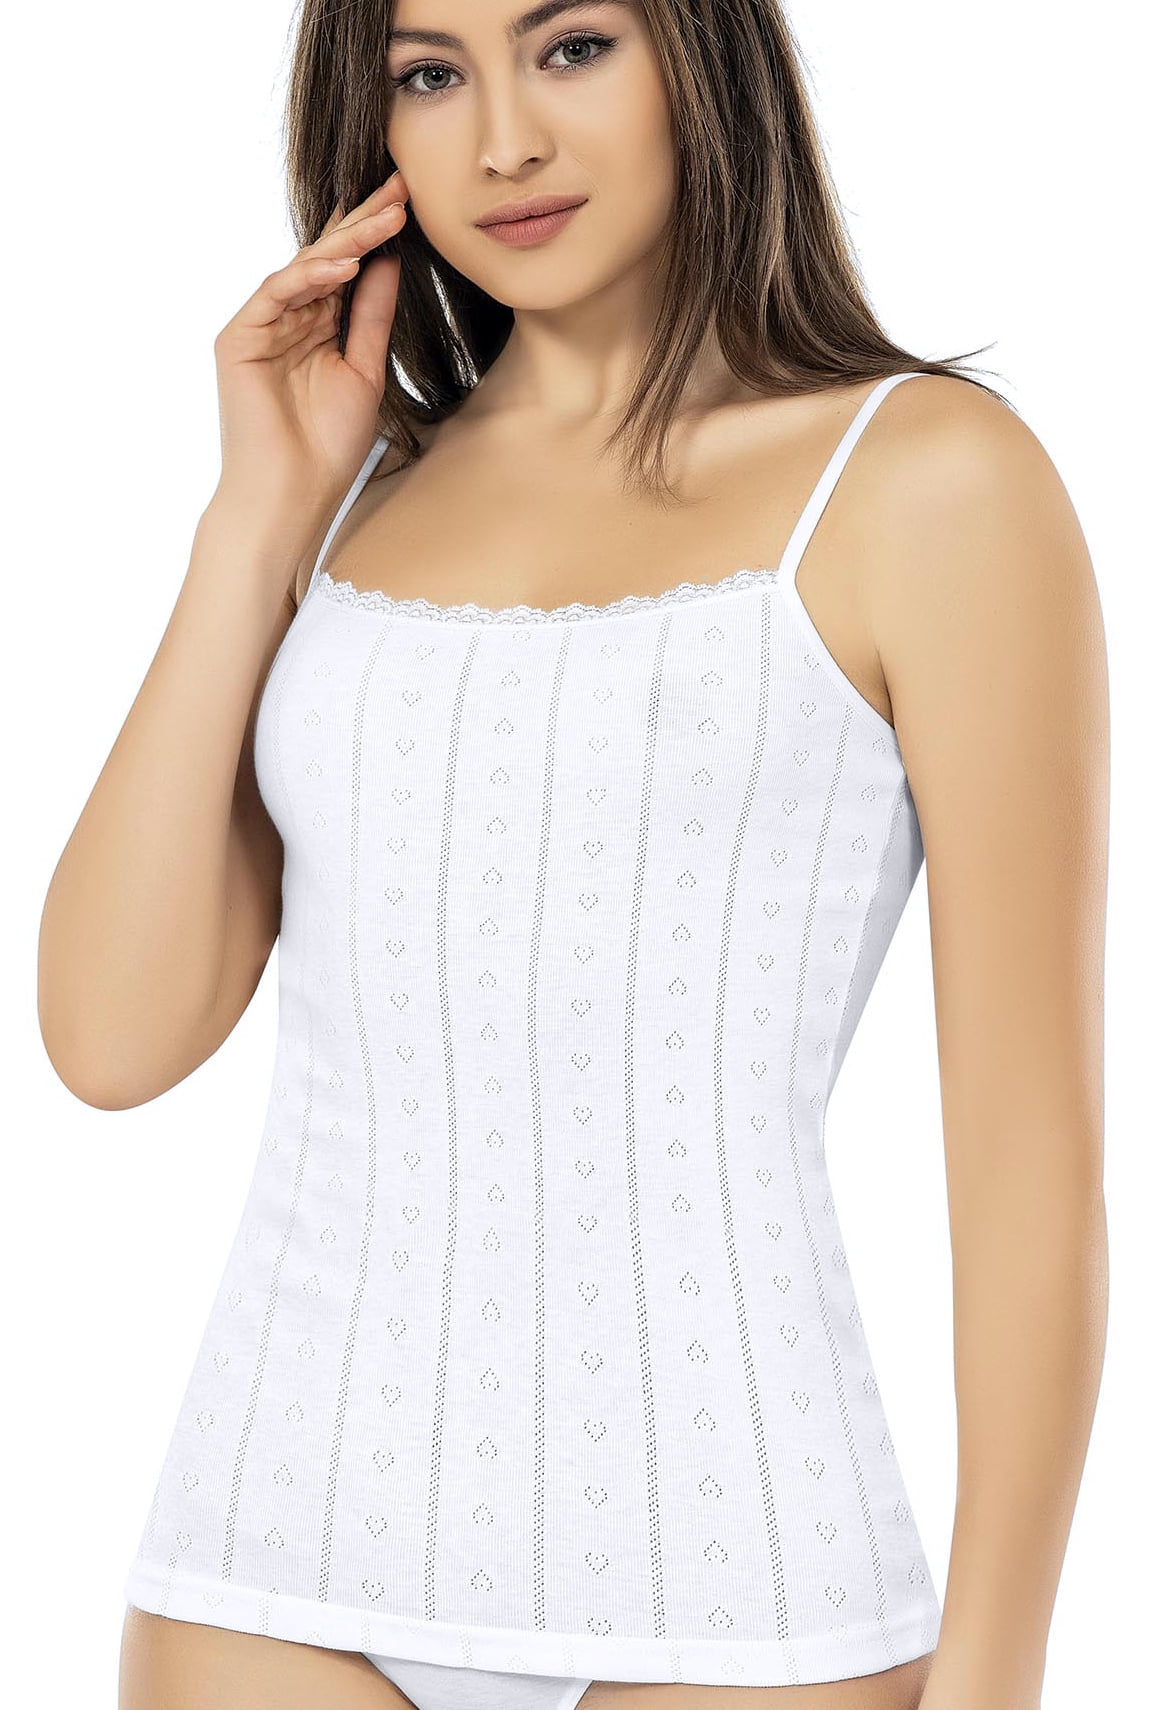 Camisole for Women, 100% Cotton, Airy Soft Comfy Lace Cami Tank Tops  Undershirt (White/Wide Strap, Small)